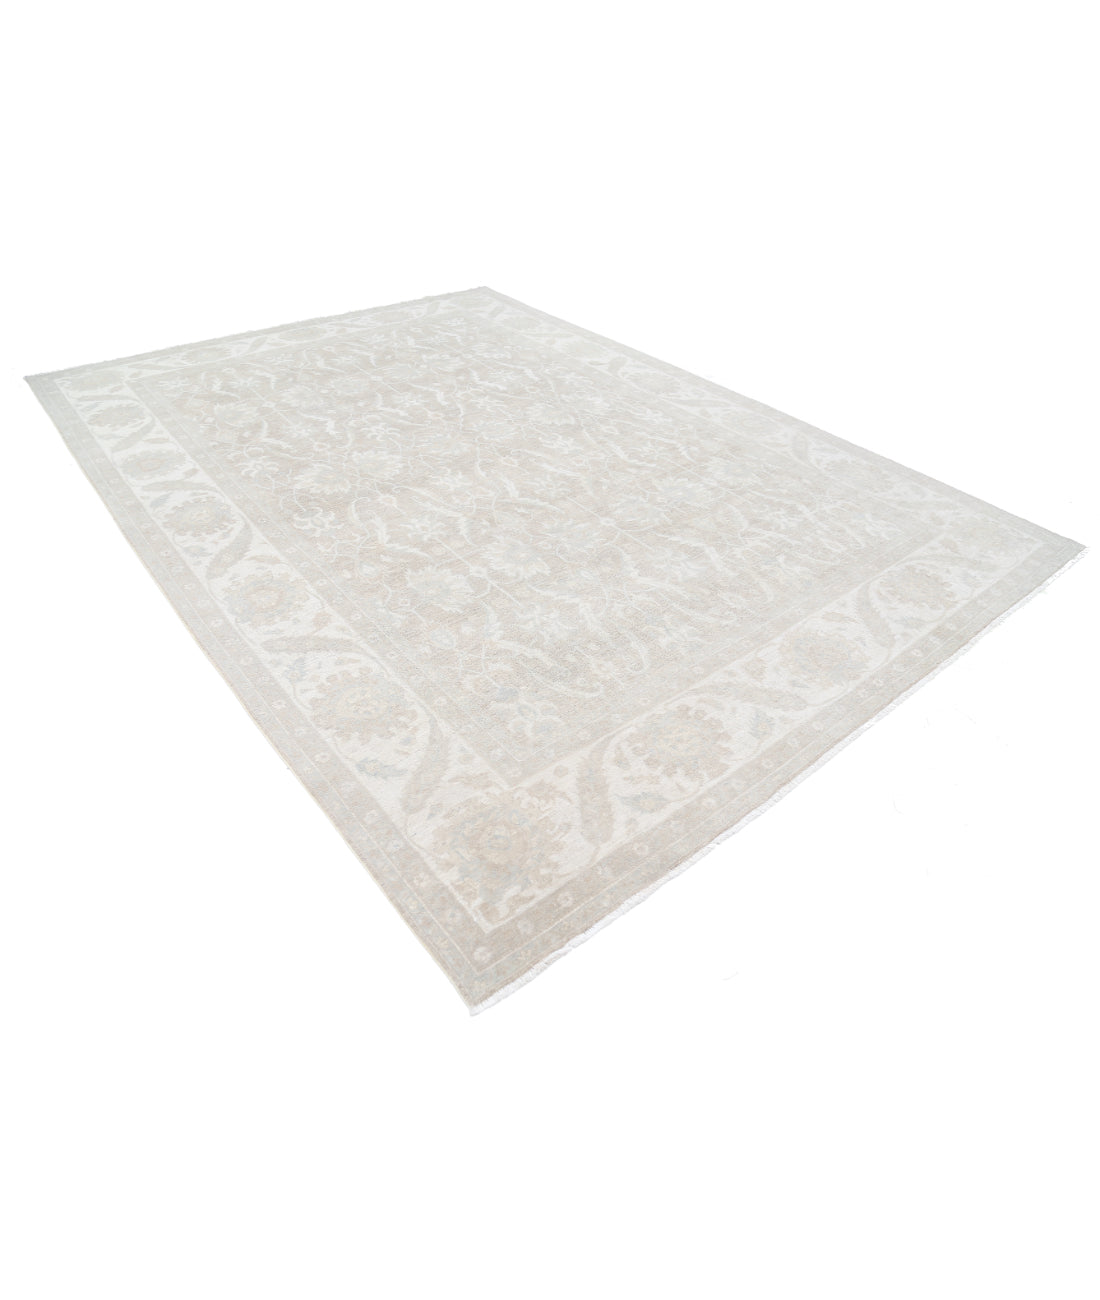 Serenity 8' 7" X 11' 9" Hand-Knotted Wool Rug 8' 7" X 11' 9" (262 X 358) / Taupe / Ivory